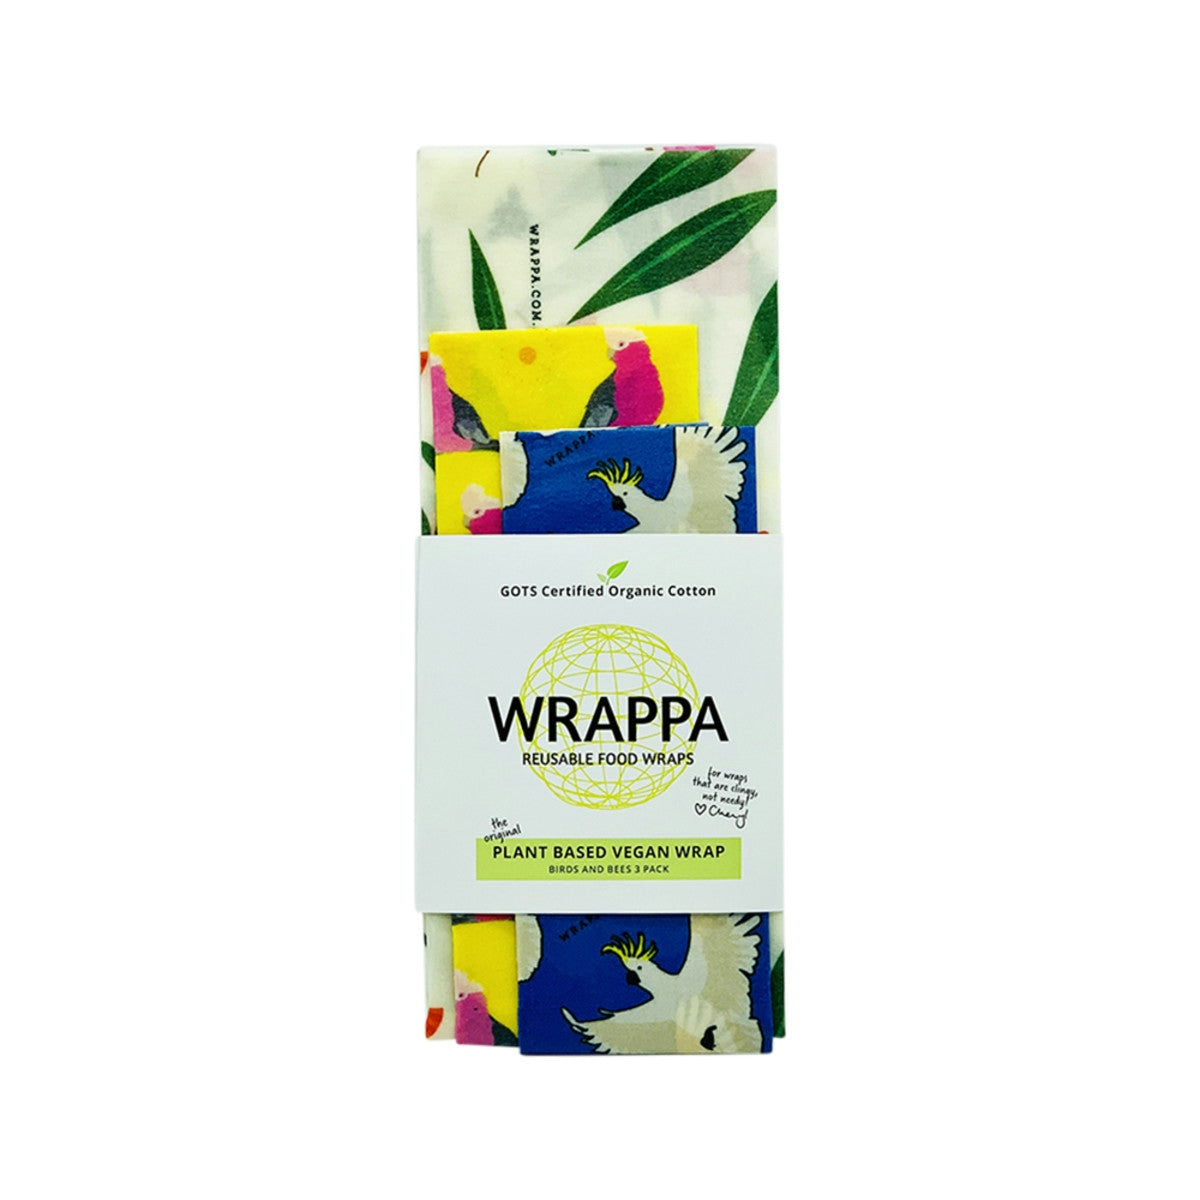 image of WRAPPA Reusable Food Wrap Vegan Birds and Bees x 3 Pack on white background